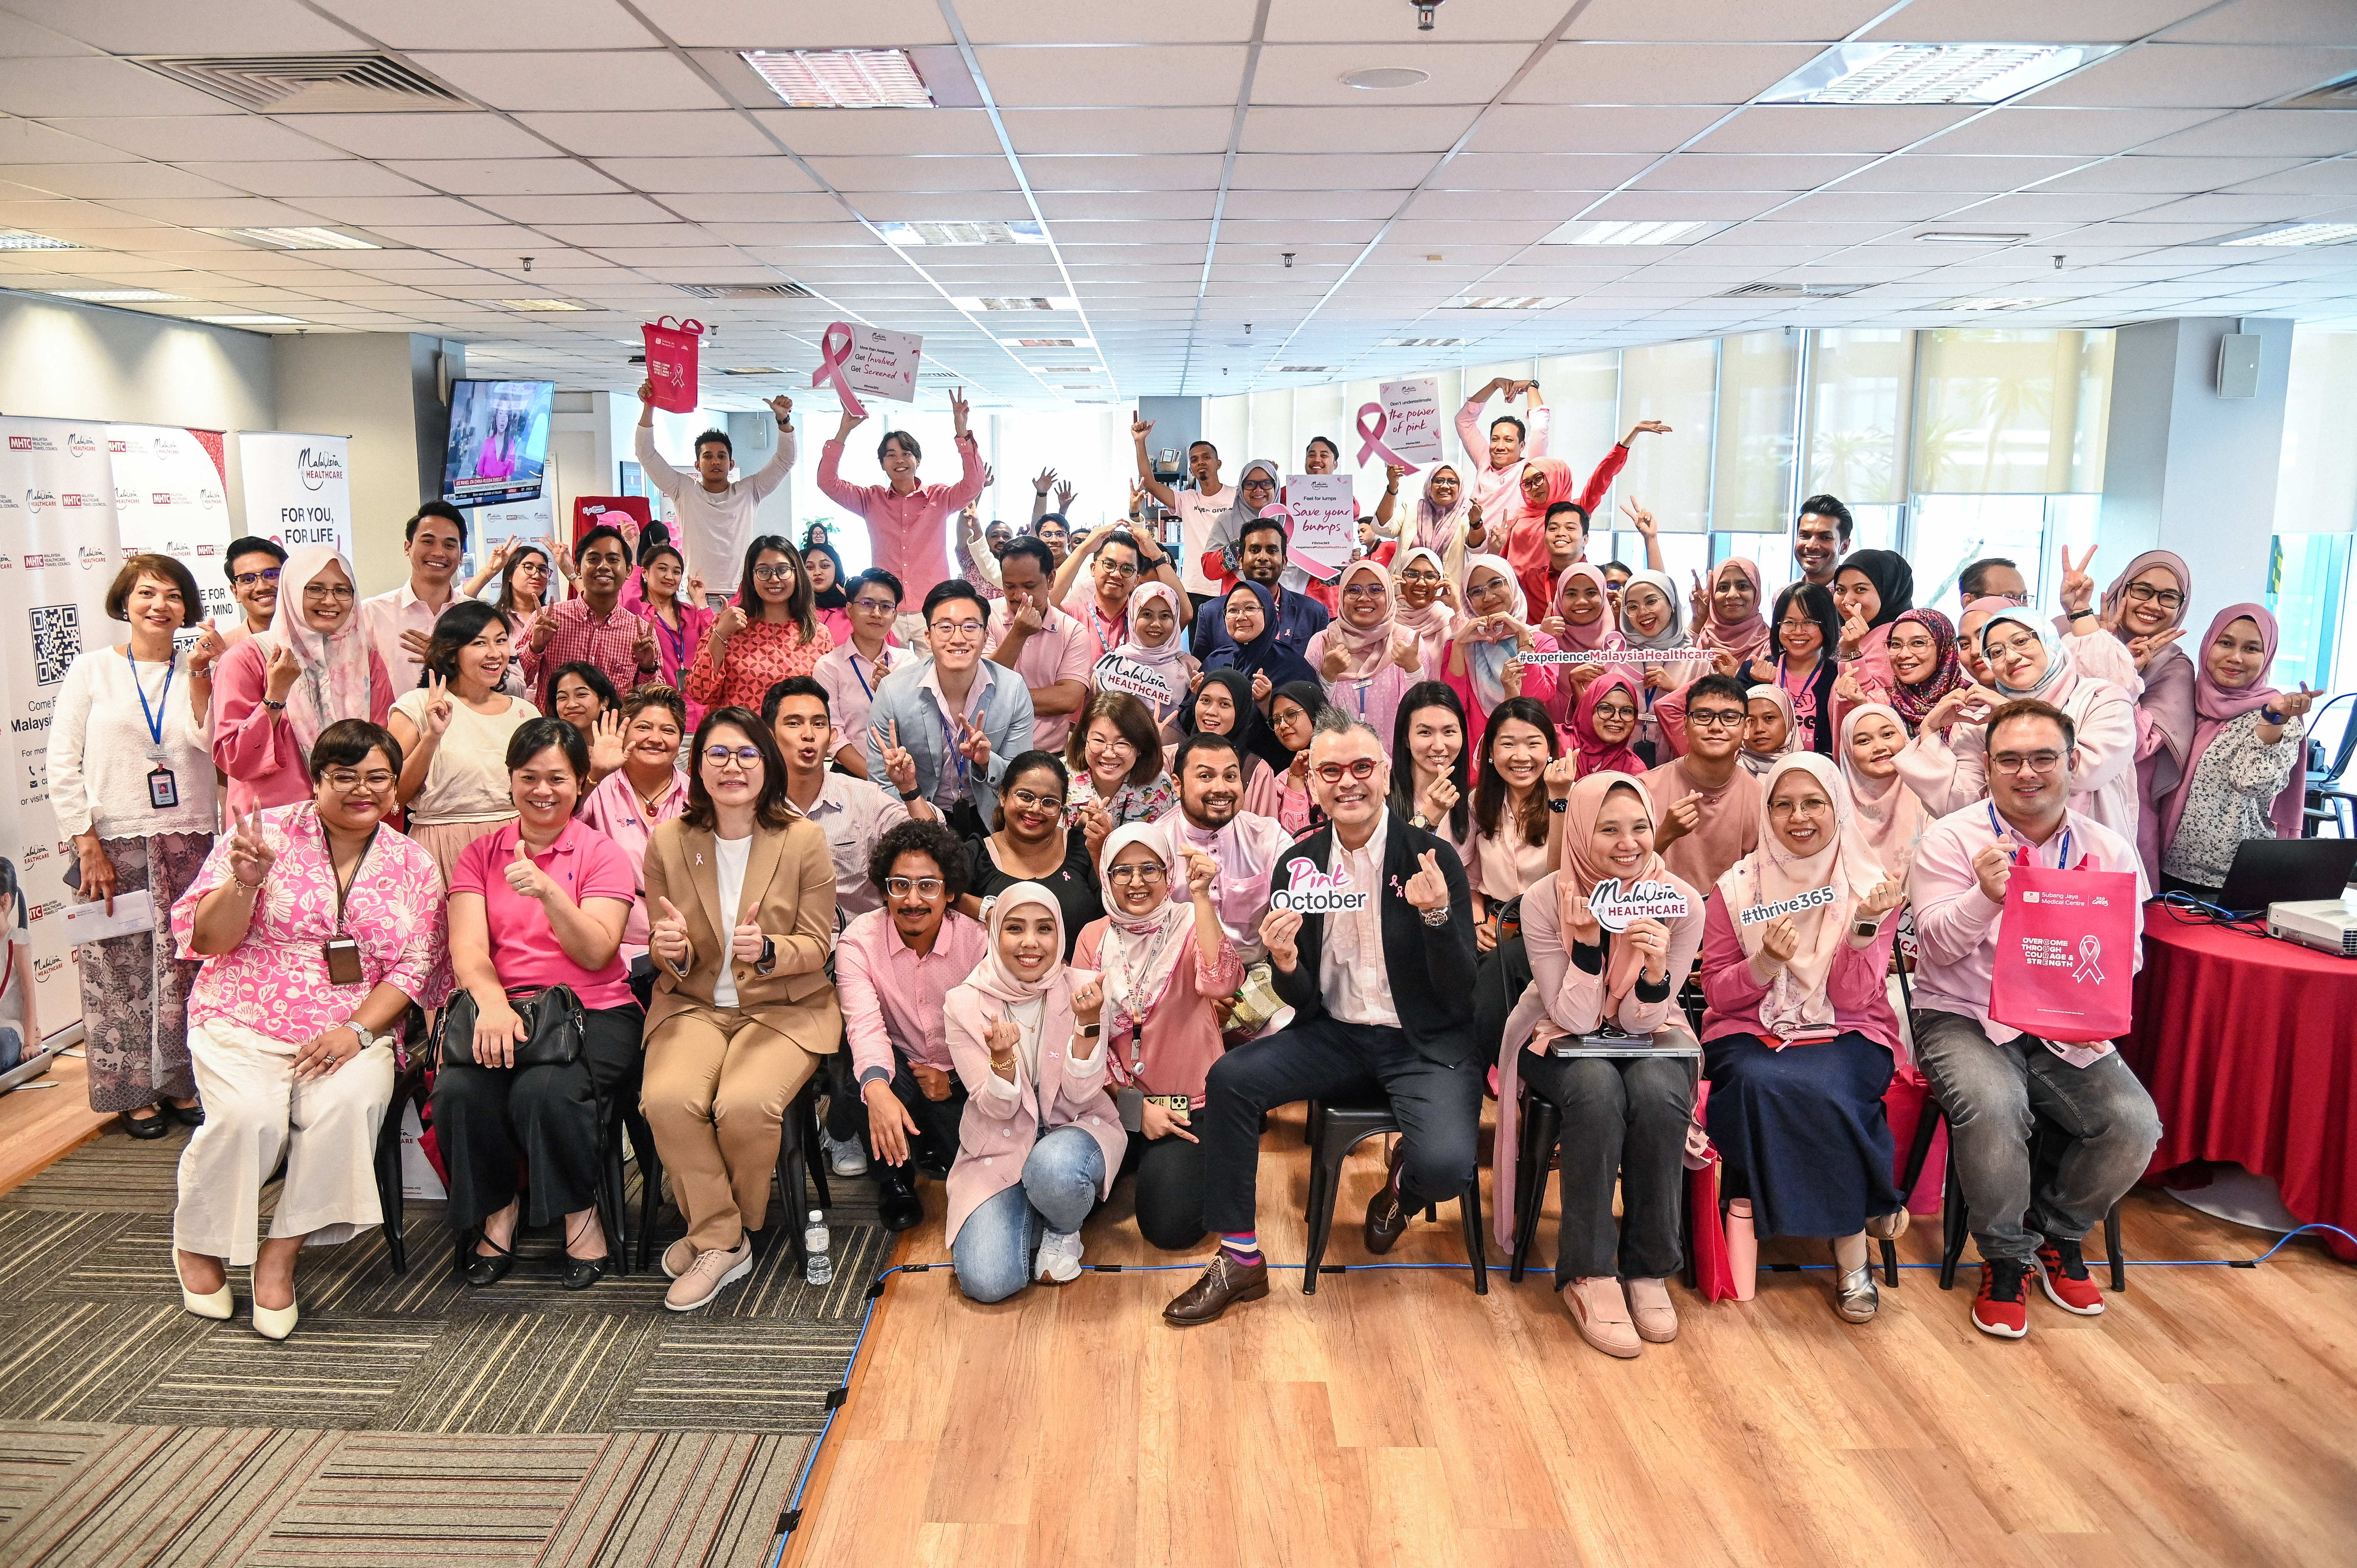 Participants of MHTC Breast Cancer Awareness Day, themed "Thrive 365," gathered for a group photo to express their support for the Breast Cancer Awareness Programme.